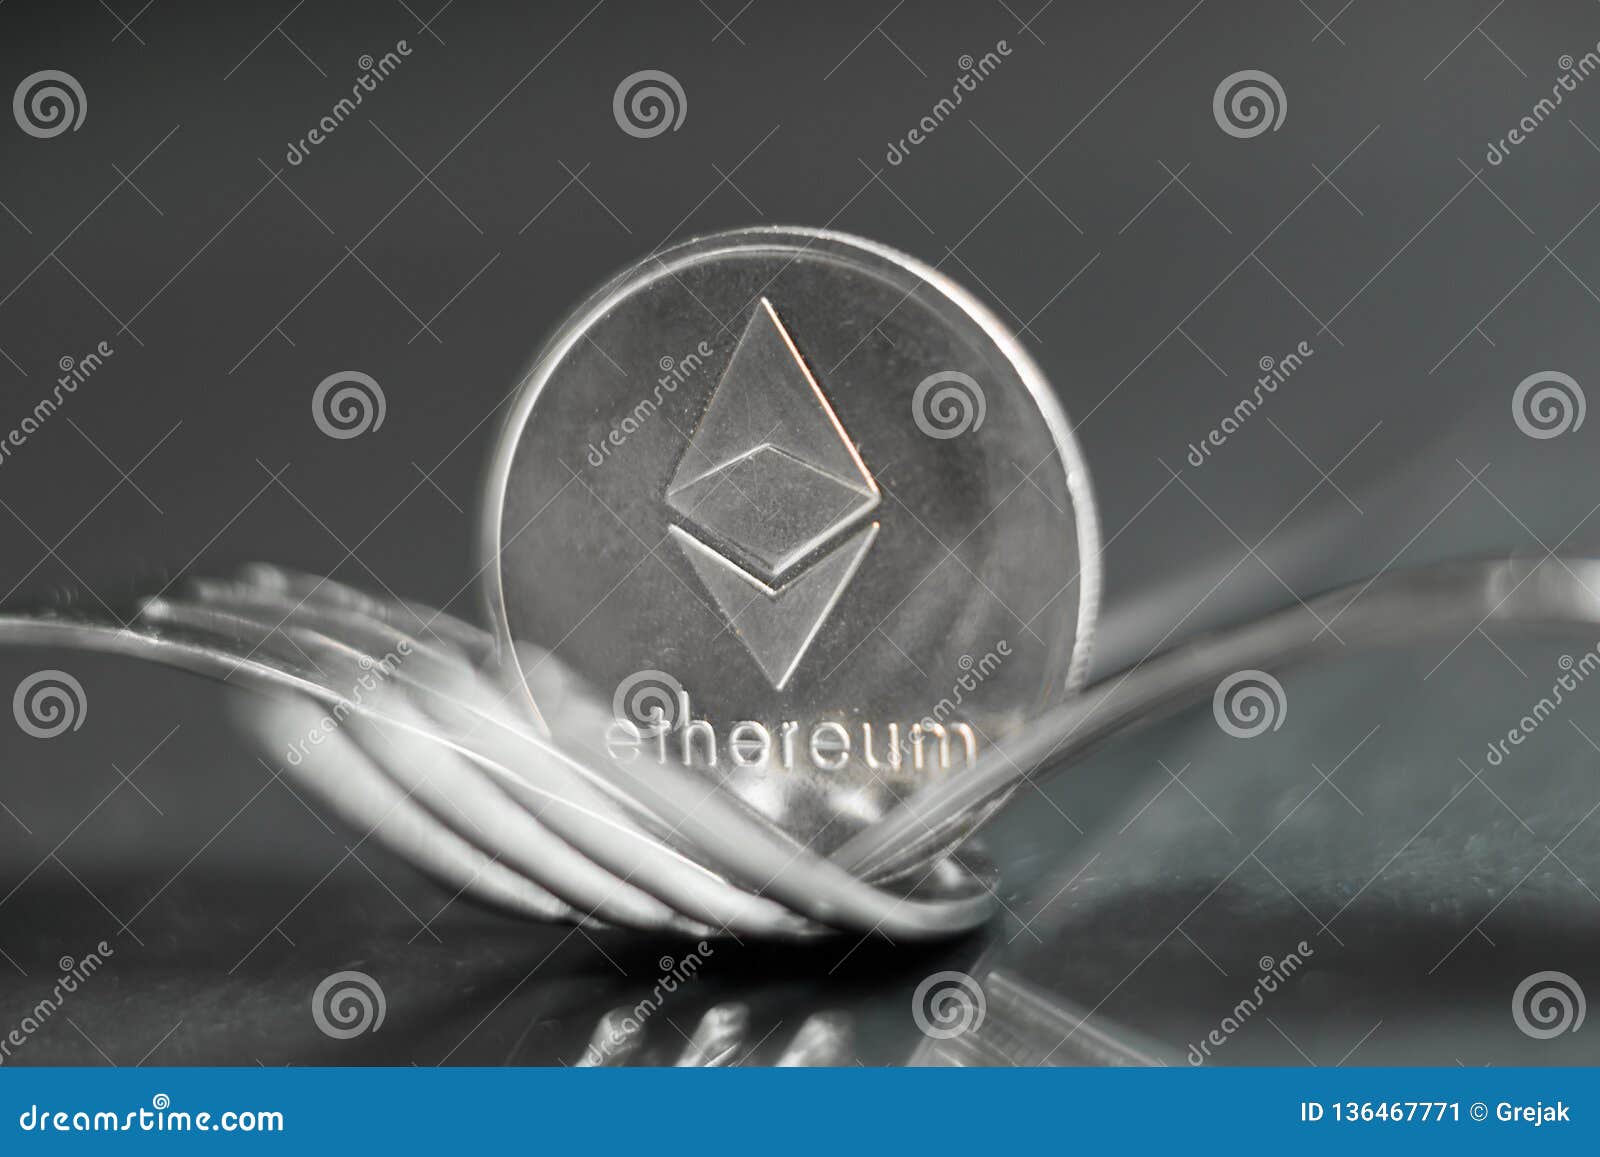 Ethereum hard fork free coins bitcoin transaction not broadcast